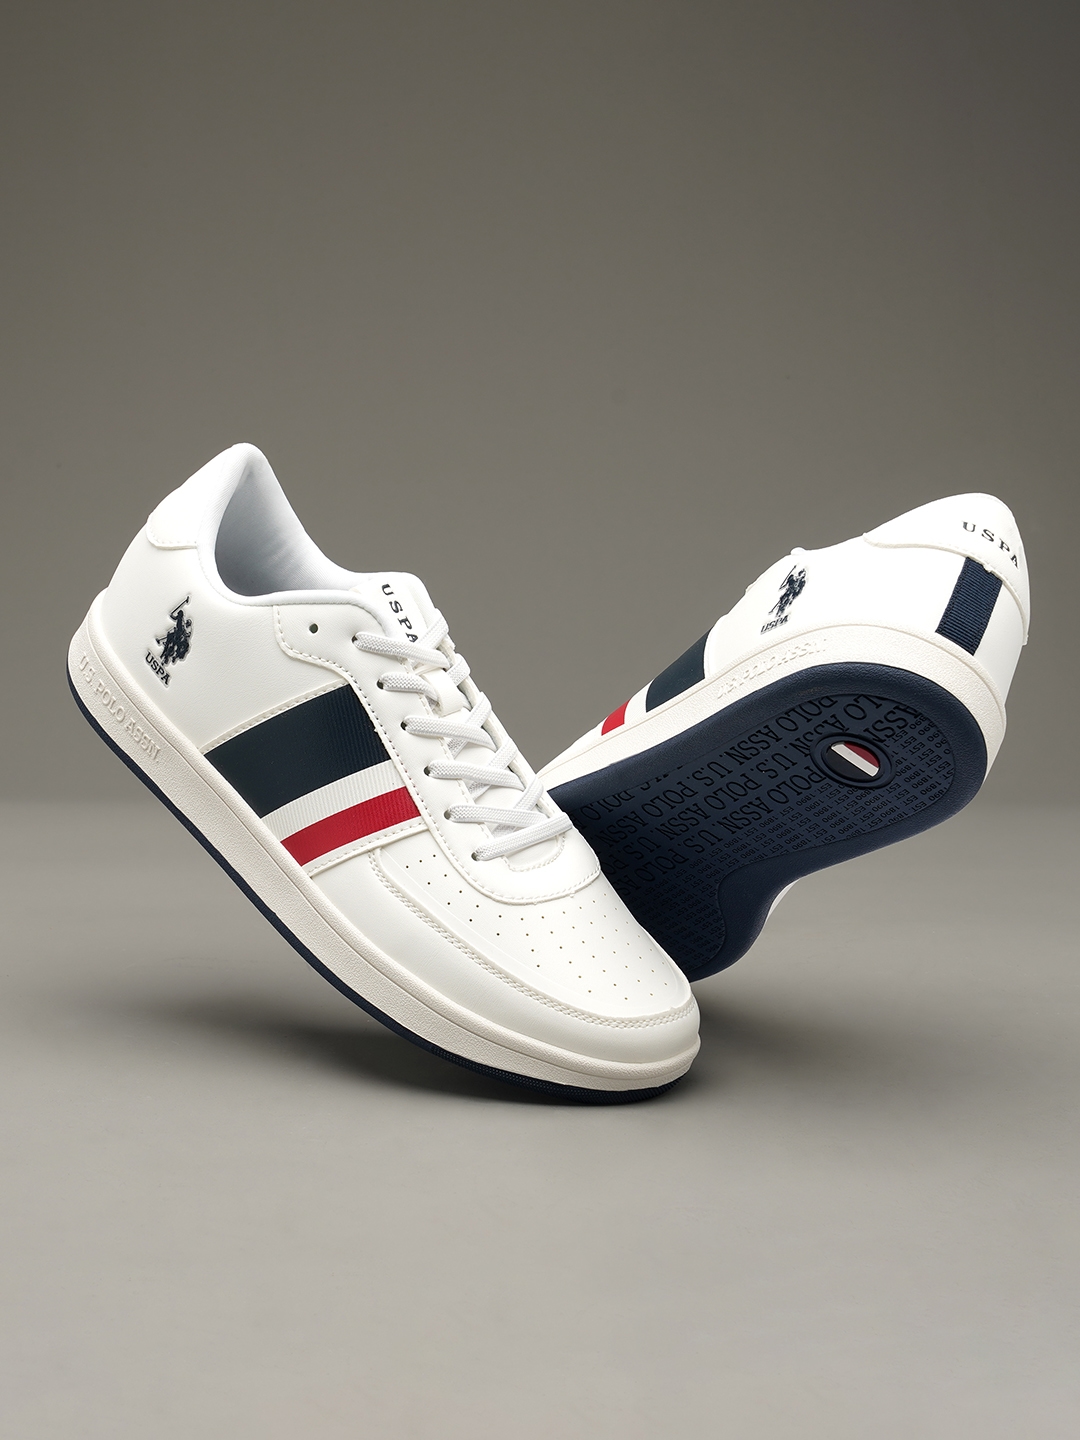 Trainers U.S. POLO ASSN. - Nobiw002 Flag NOBIW002W/ANY2 WHI - Sneakers -  Low shoes - Women's shoes | efootwear.eu